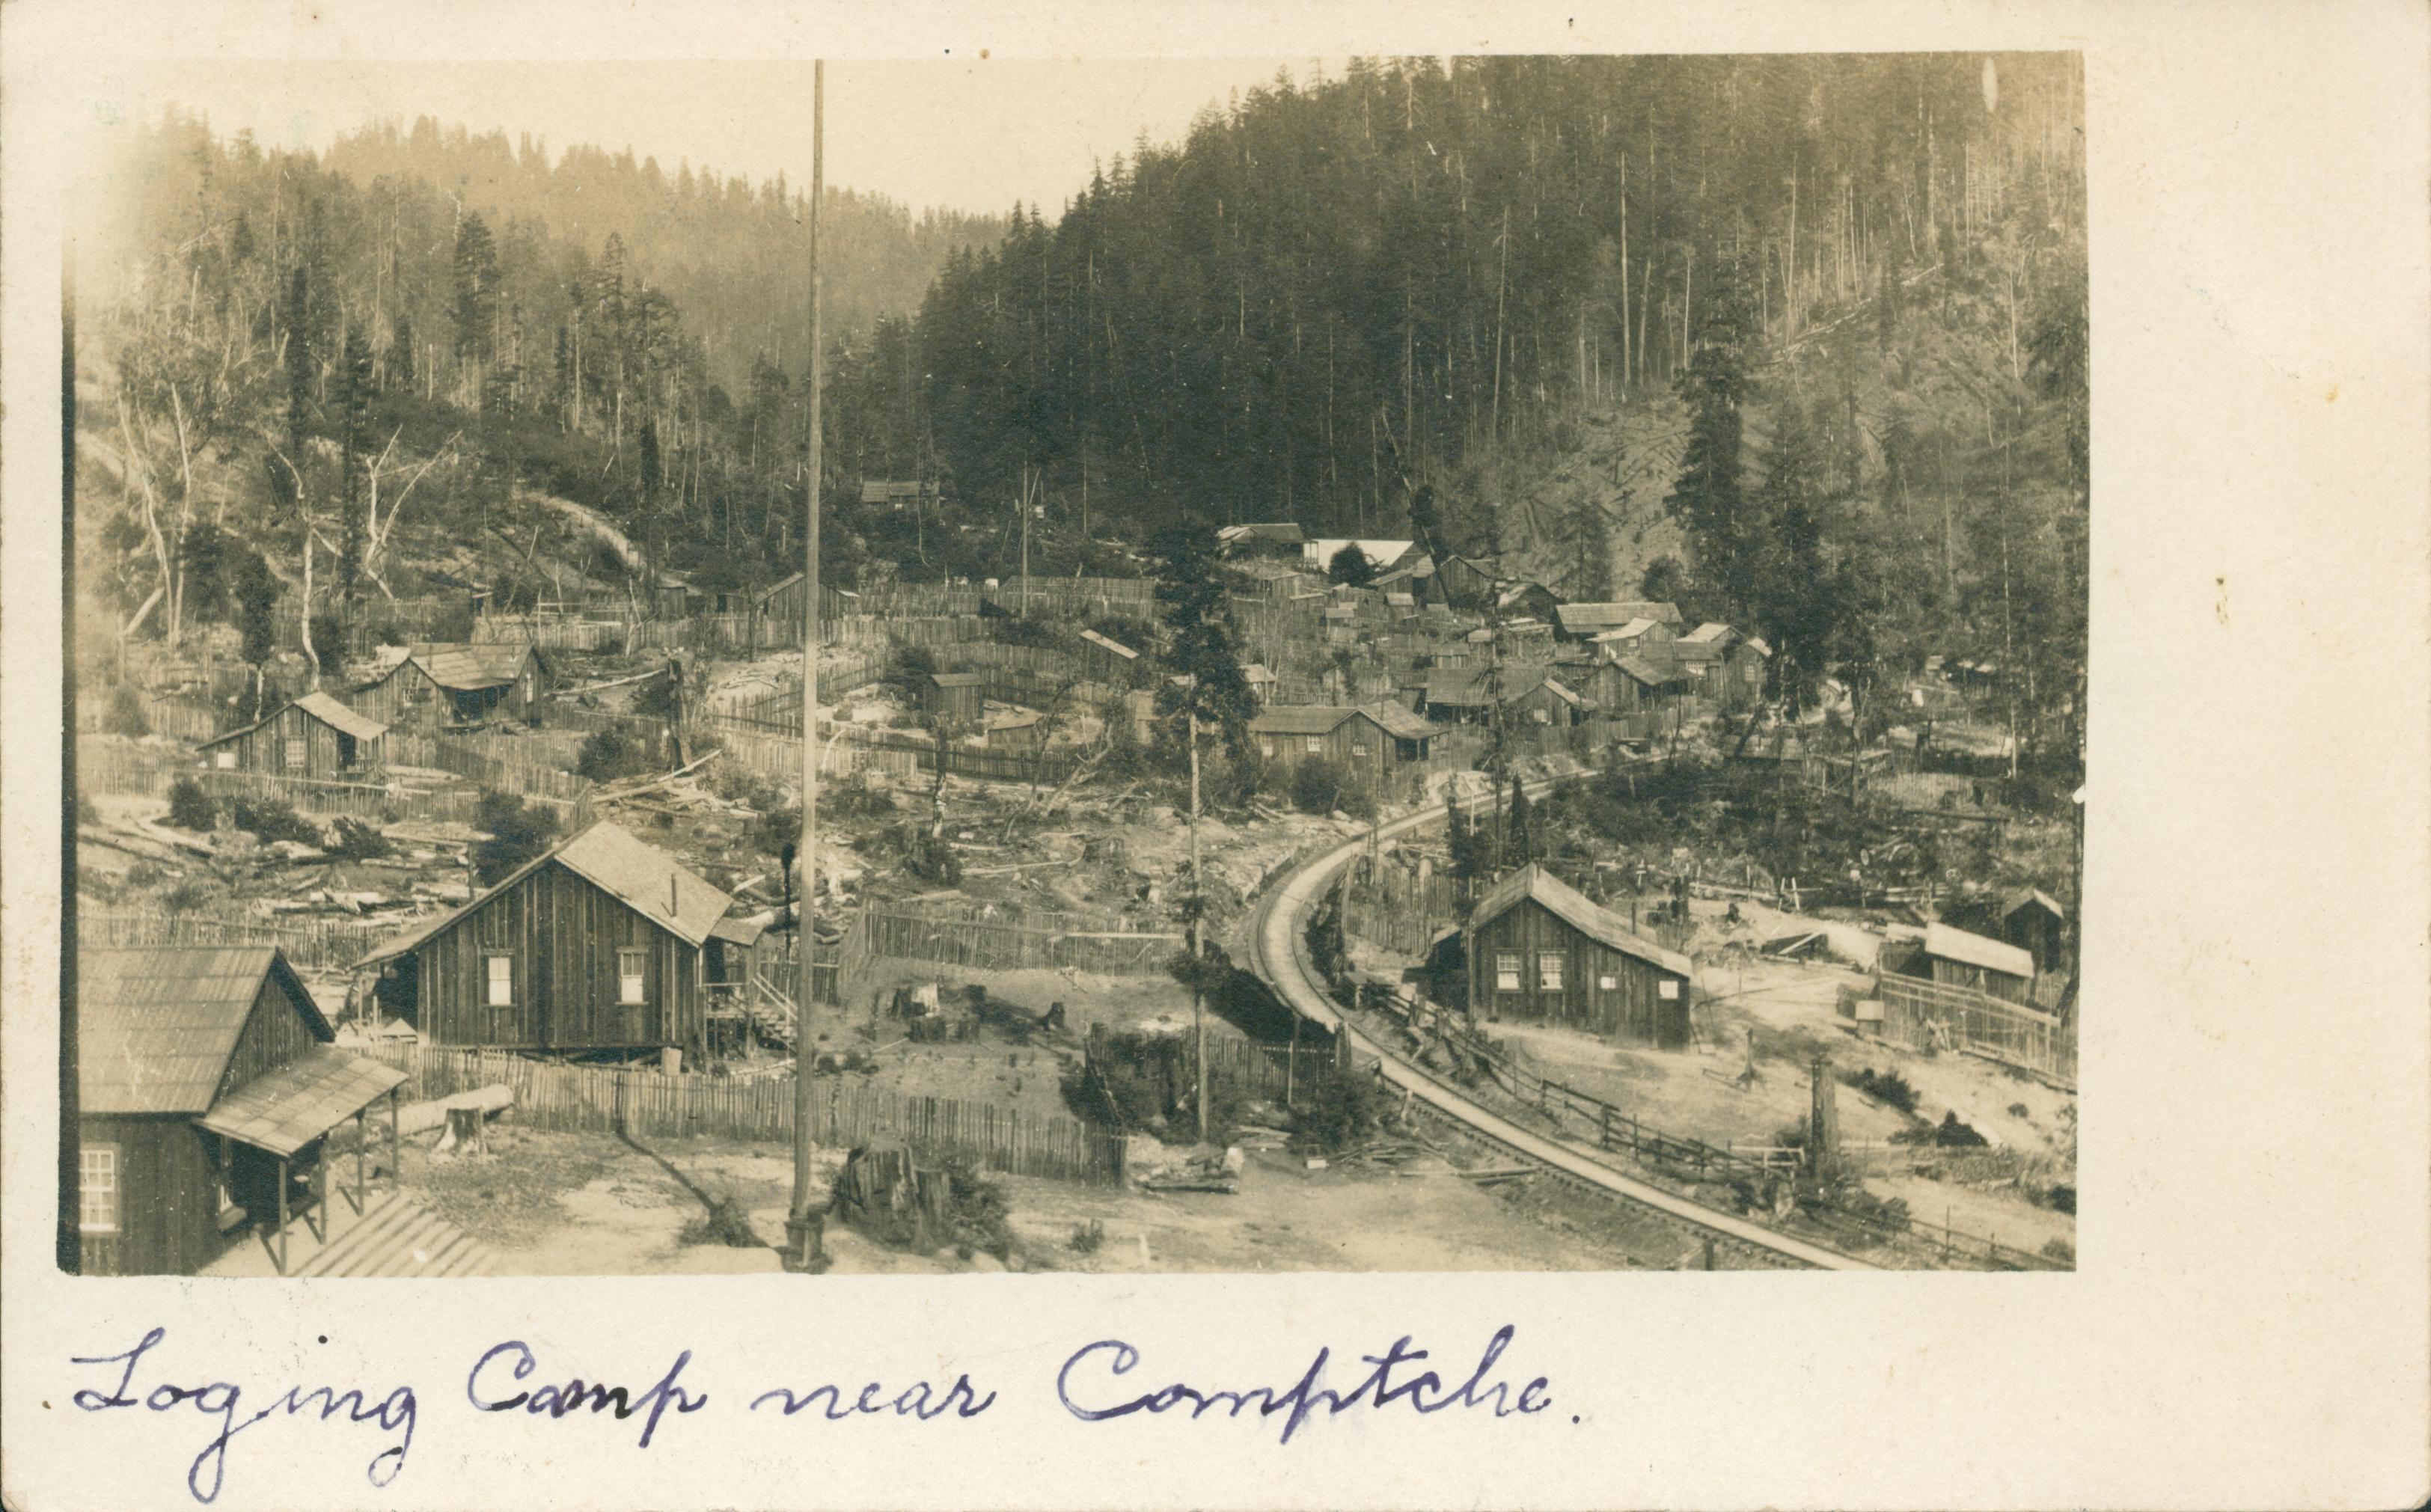 Logging camp in valley, surrounded by tree covered mountains, train track runs through camp